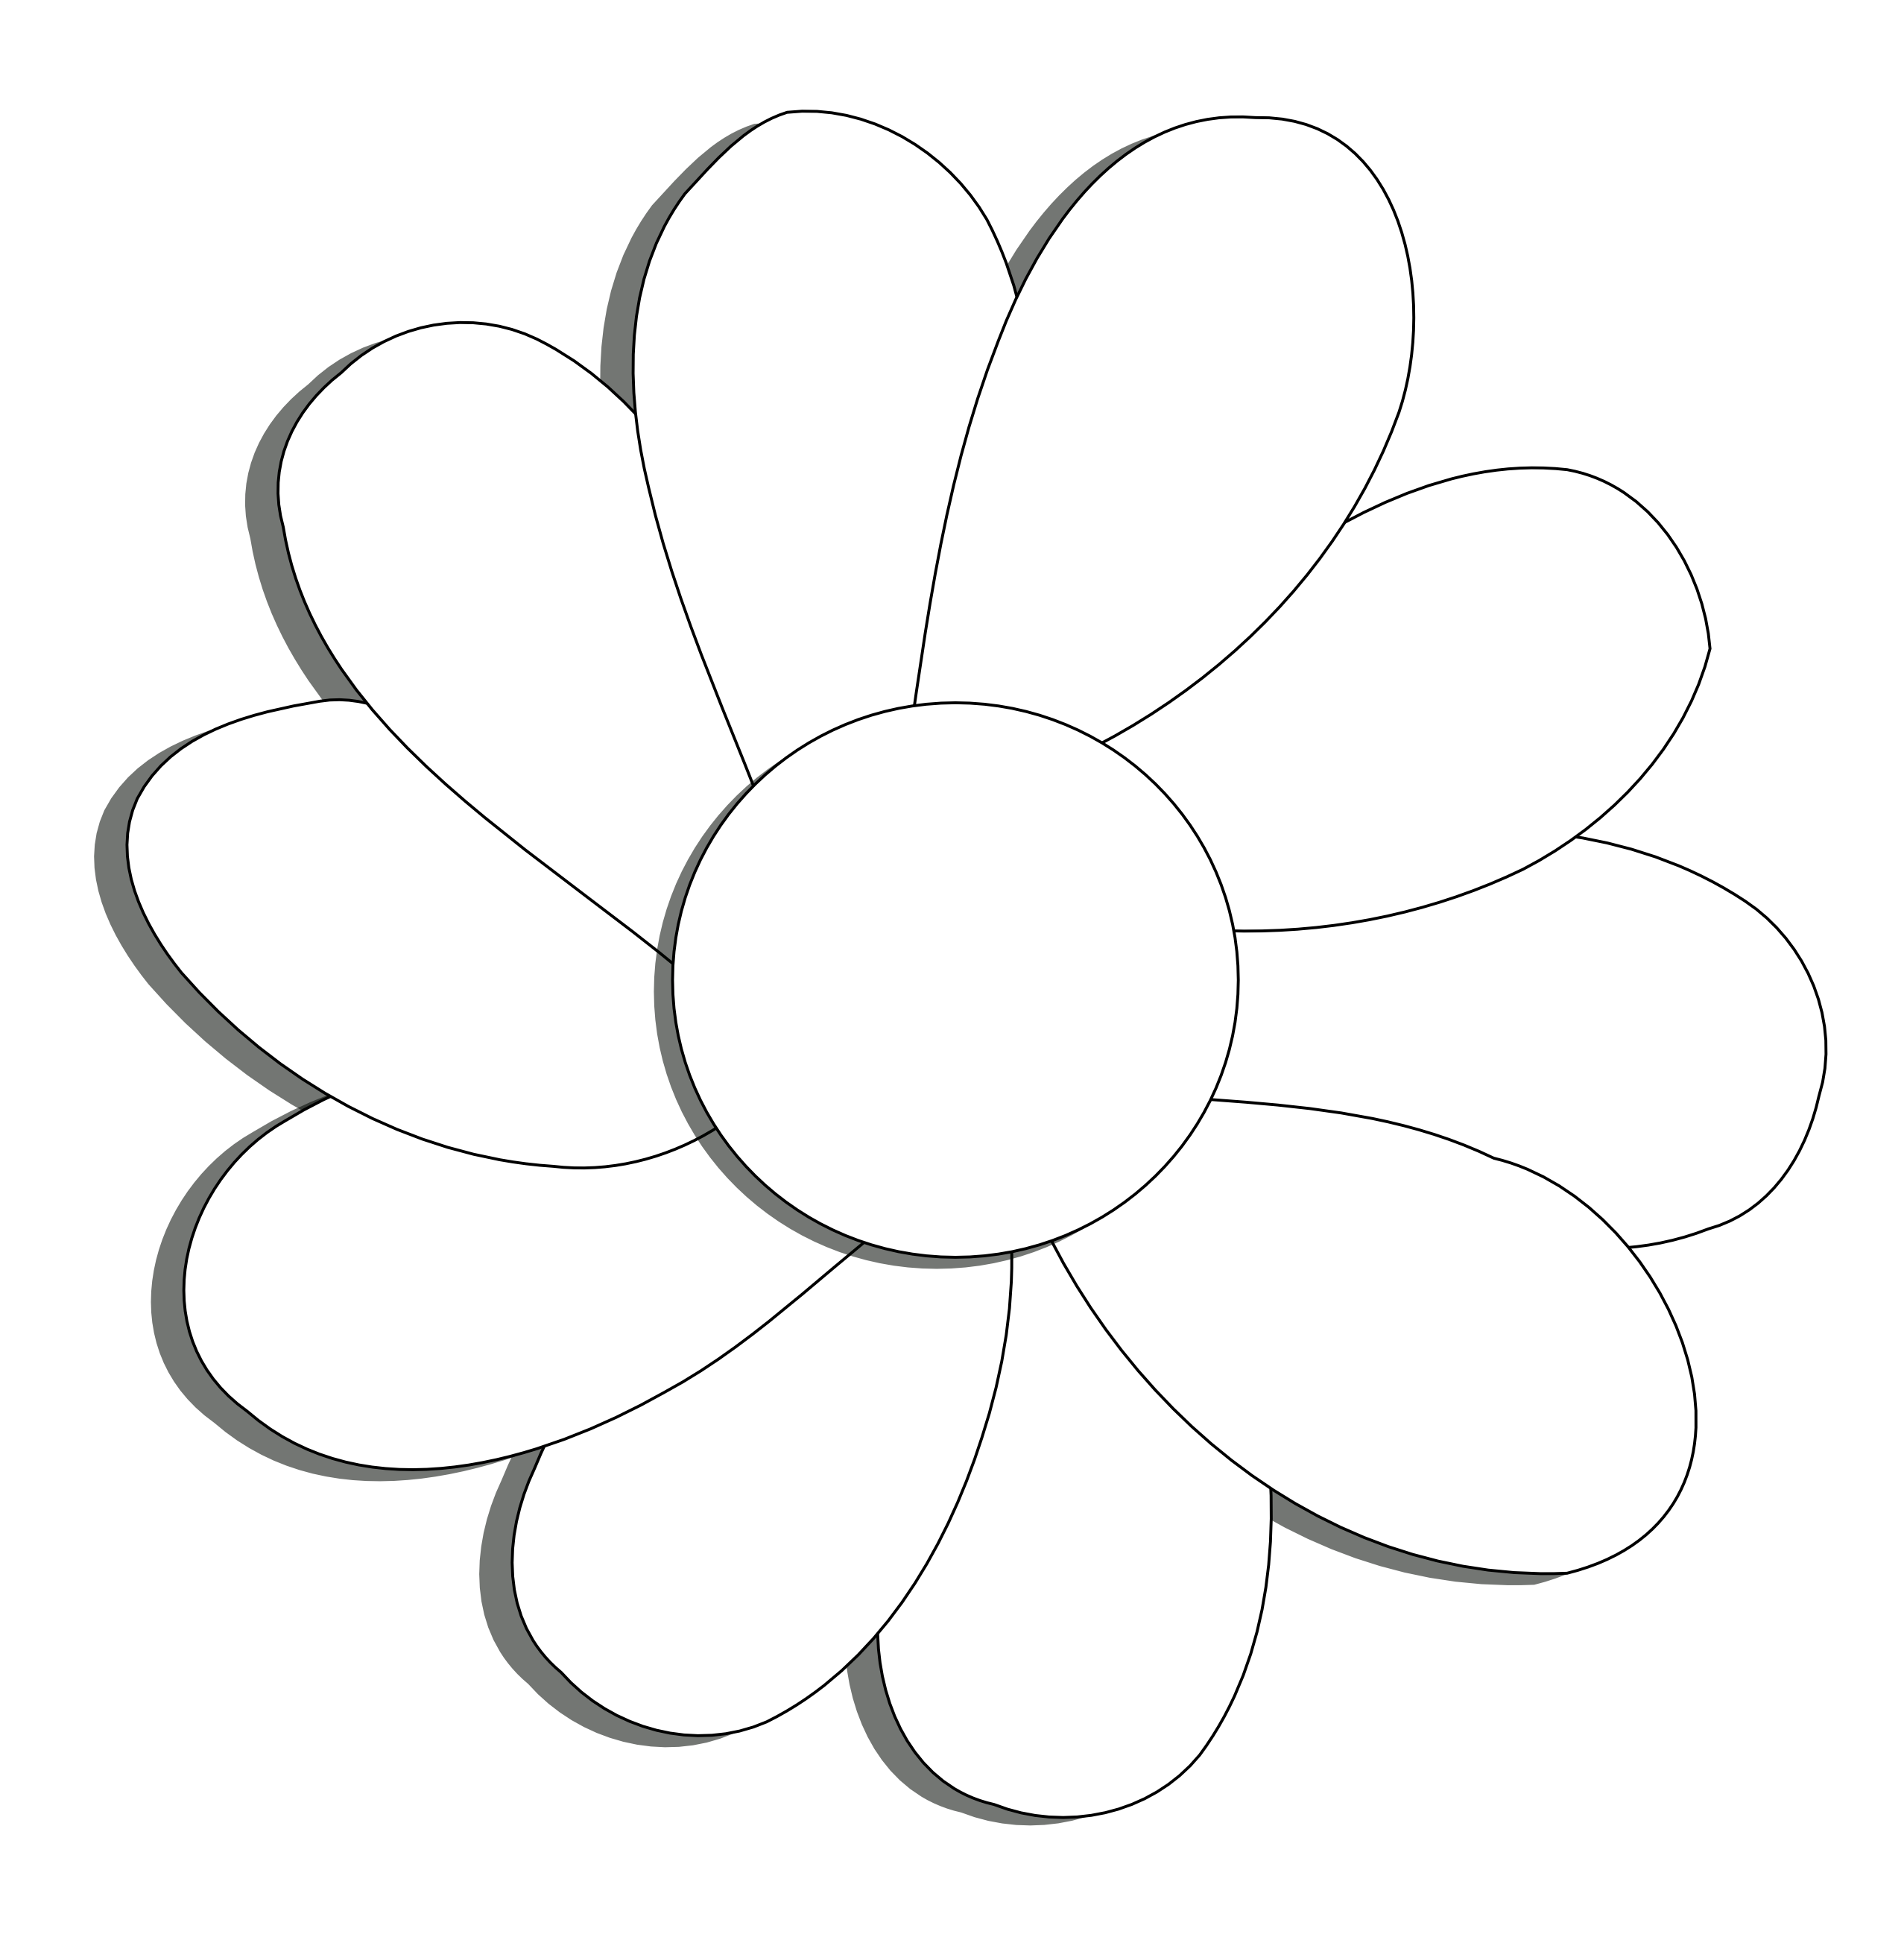 daisy flower 6 black white line art drawing scalable vector ...